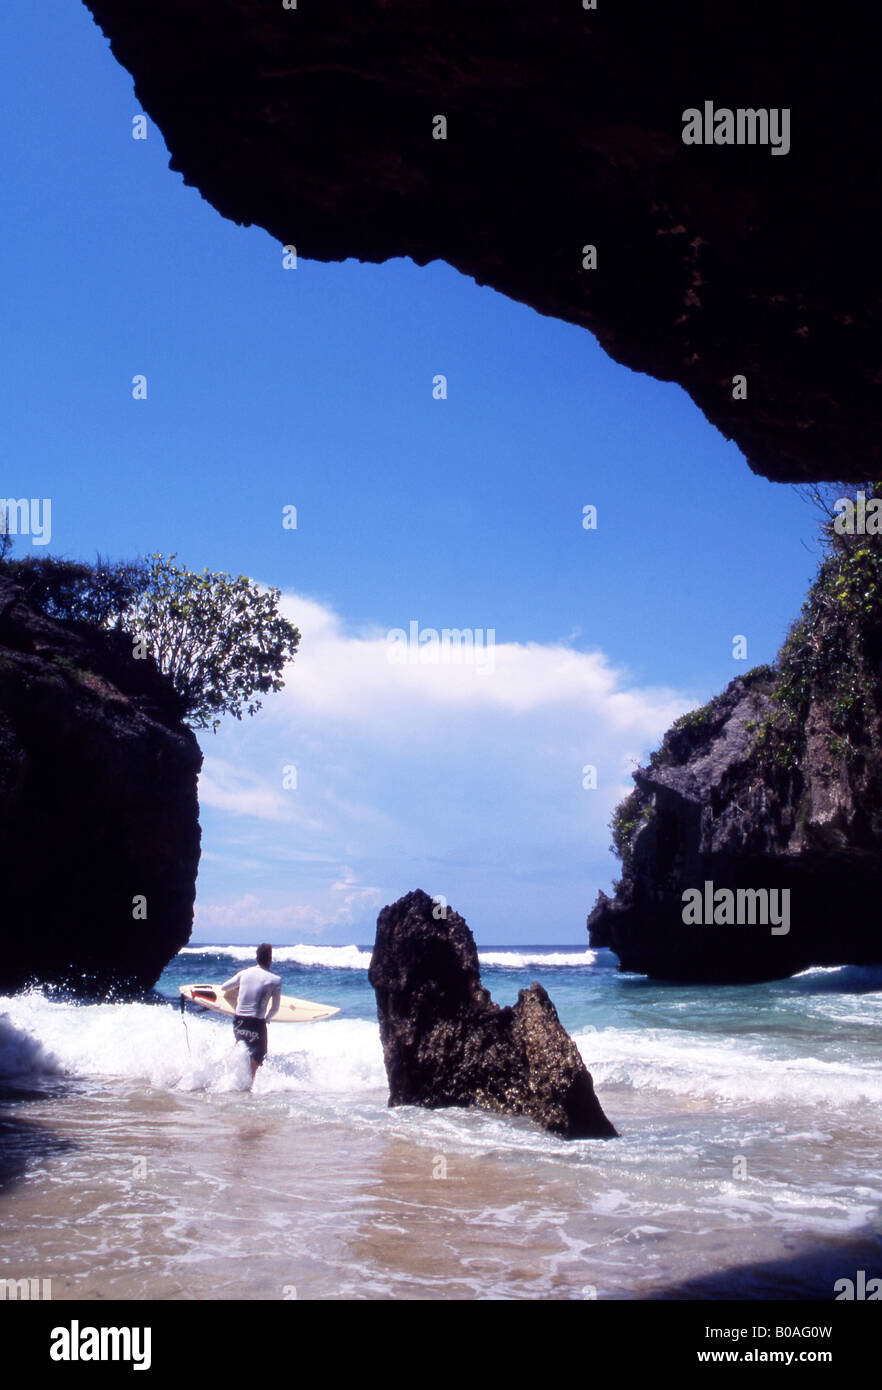 Surfer advances from the caves into the sea at Surfers Retreat Uluwater Bali Indonesia Stock Photo